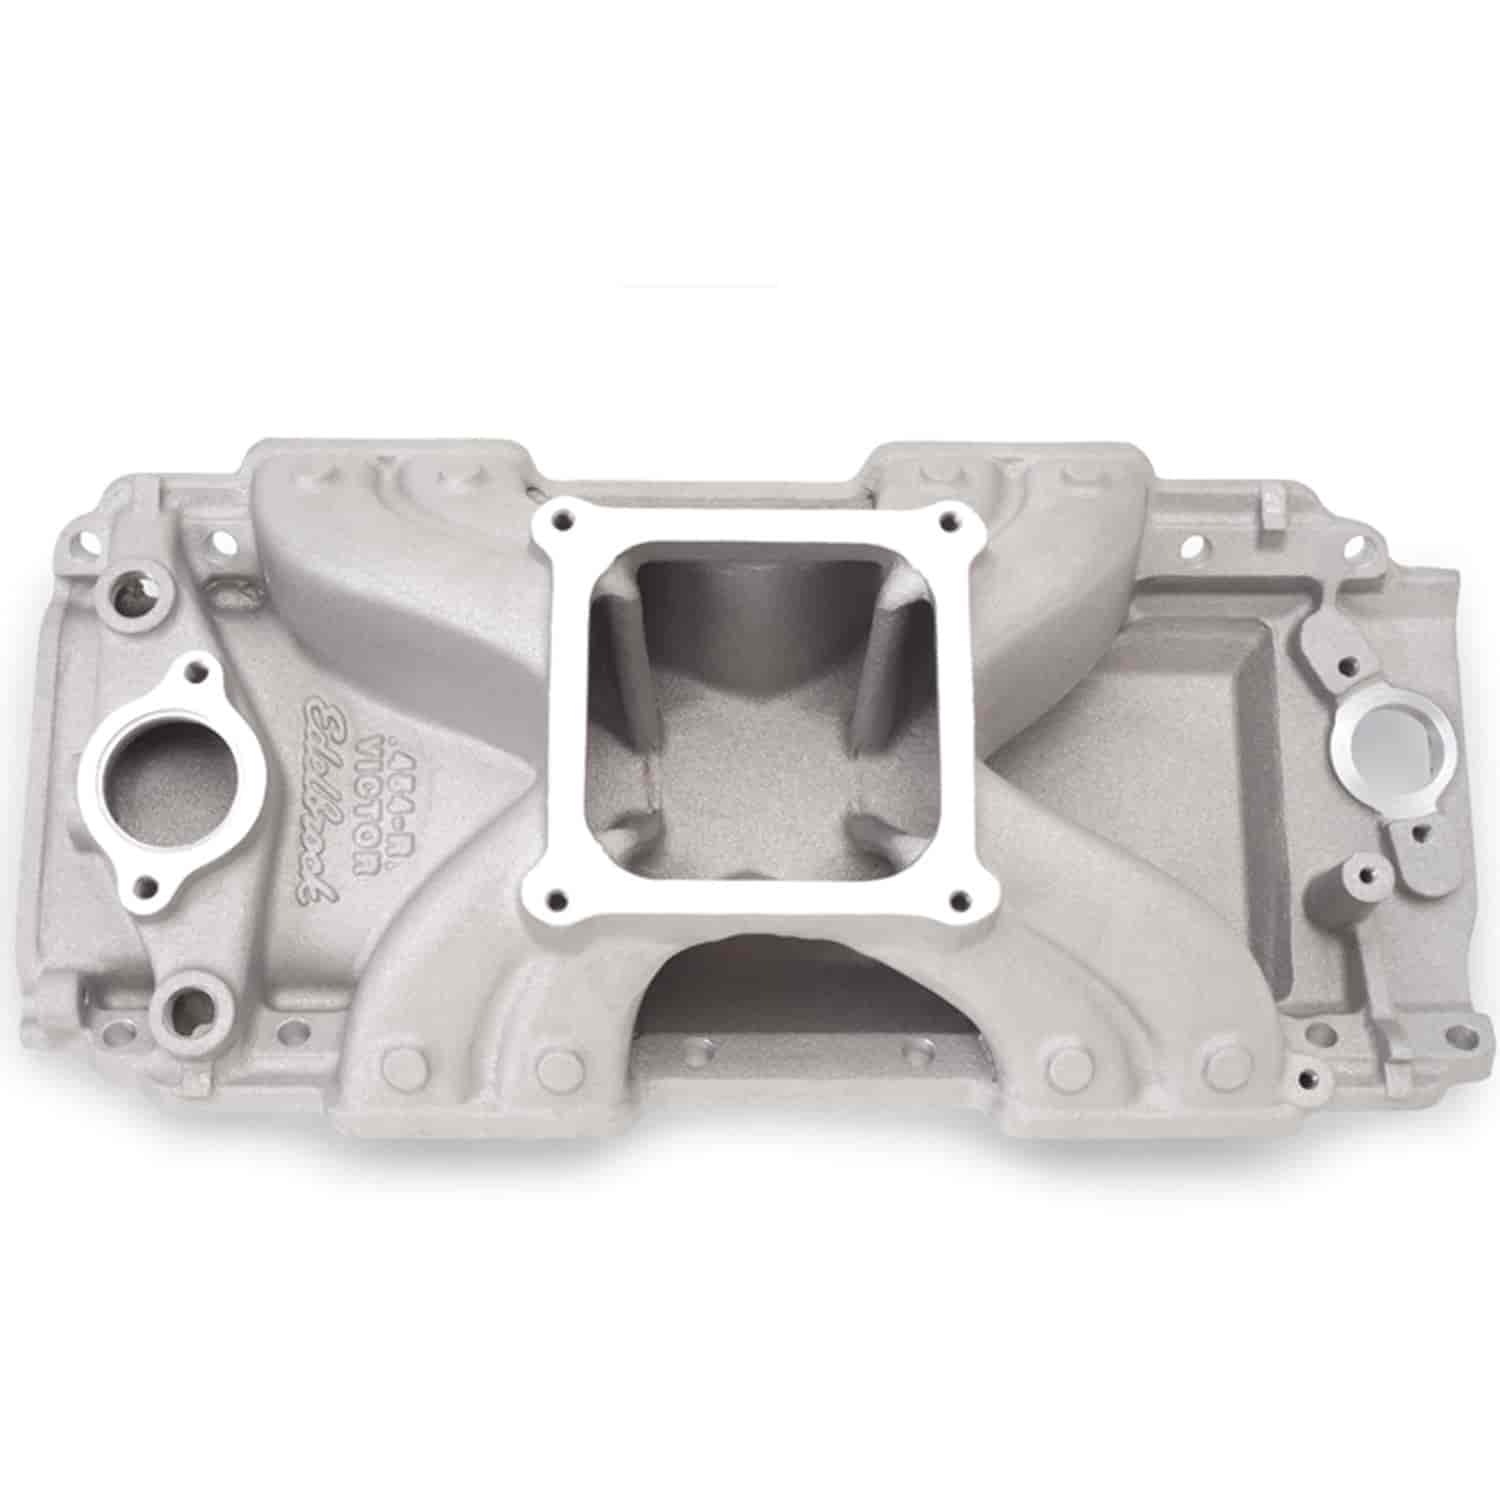 Victor 454-LO Intake Manifold Big Block Chevy with 1975-Earlier large oval port heads